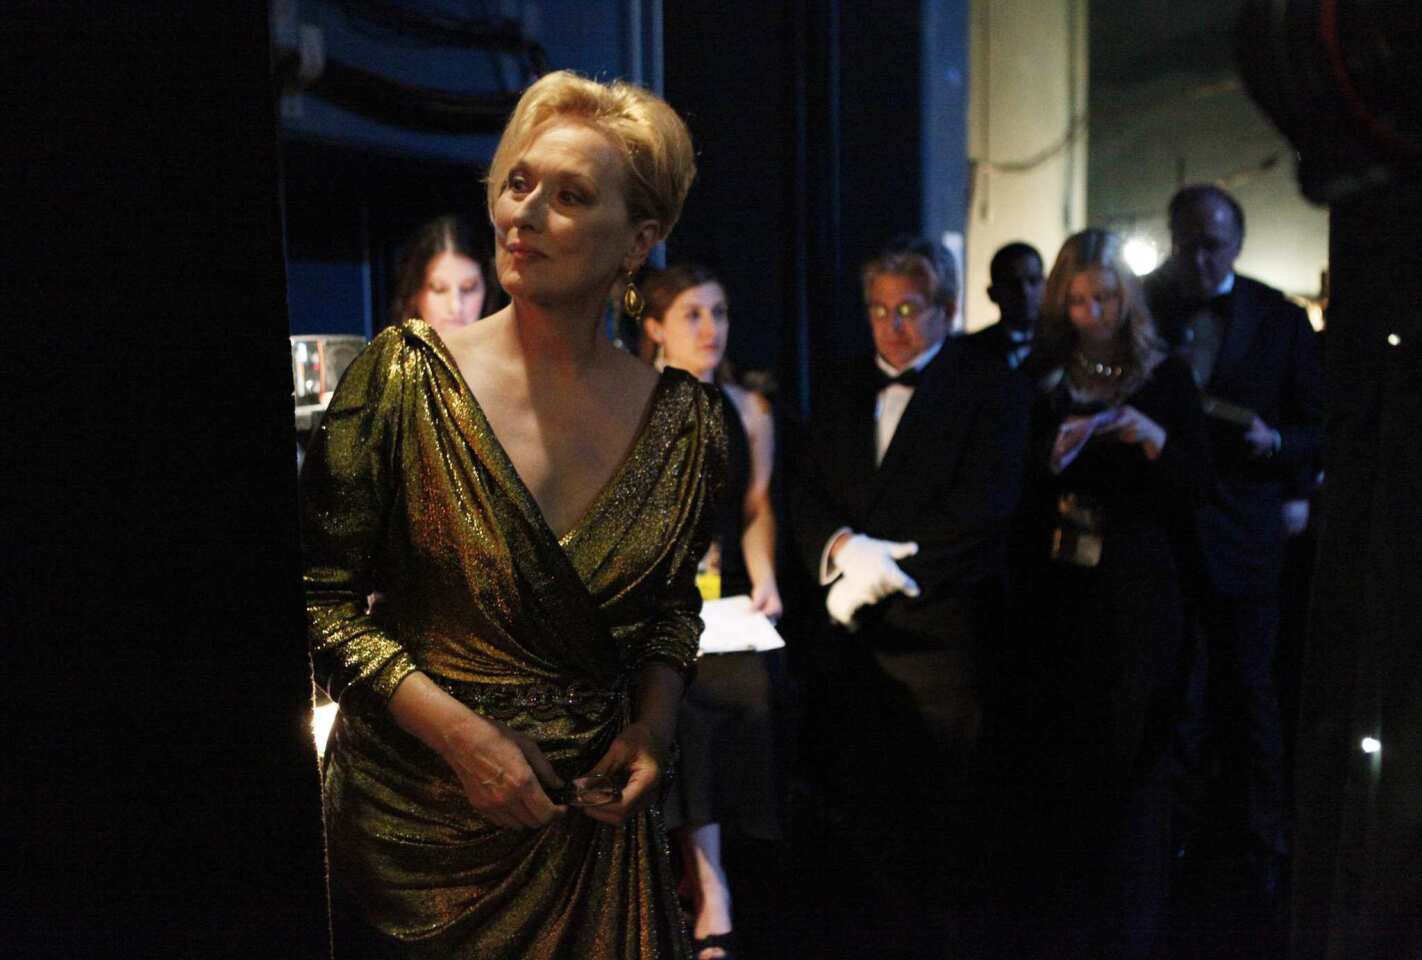 Meryl Streep backstage at the 2012 Oscars. Streep won an Academy Award for her leading role in "The Iron Lady" -- her second best actress Oscar. She received her first in 1983 for "Sophie's Choice."